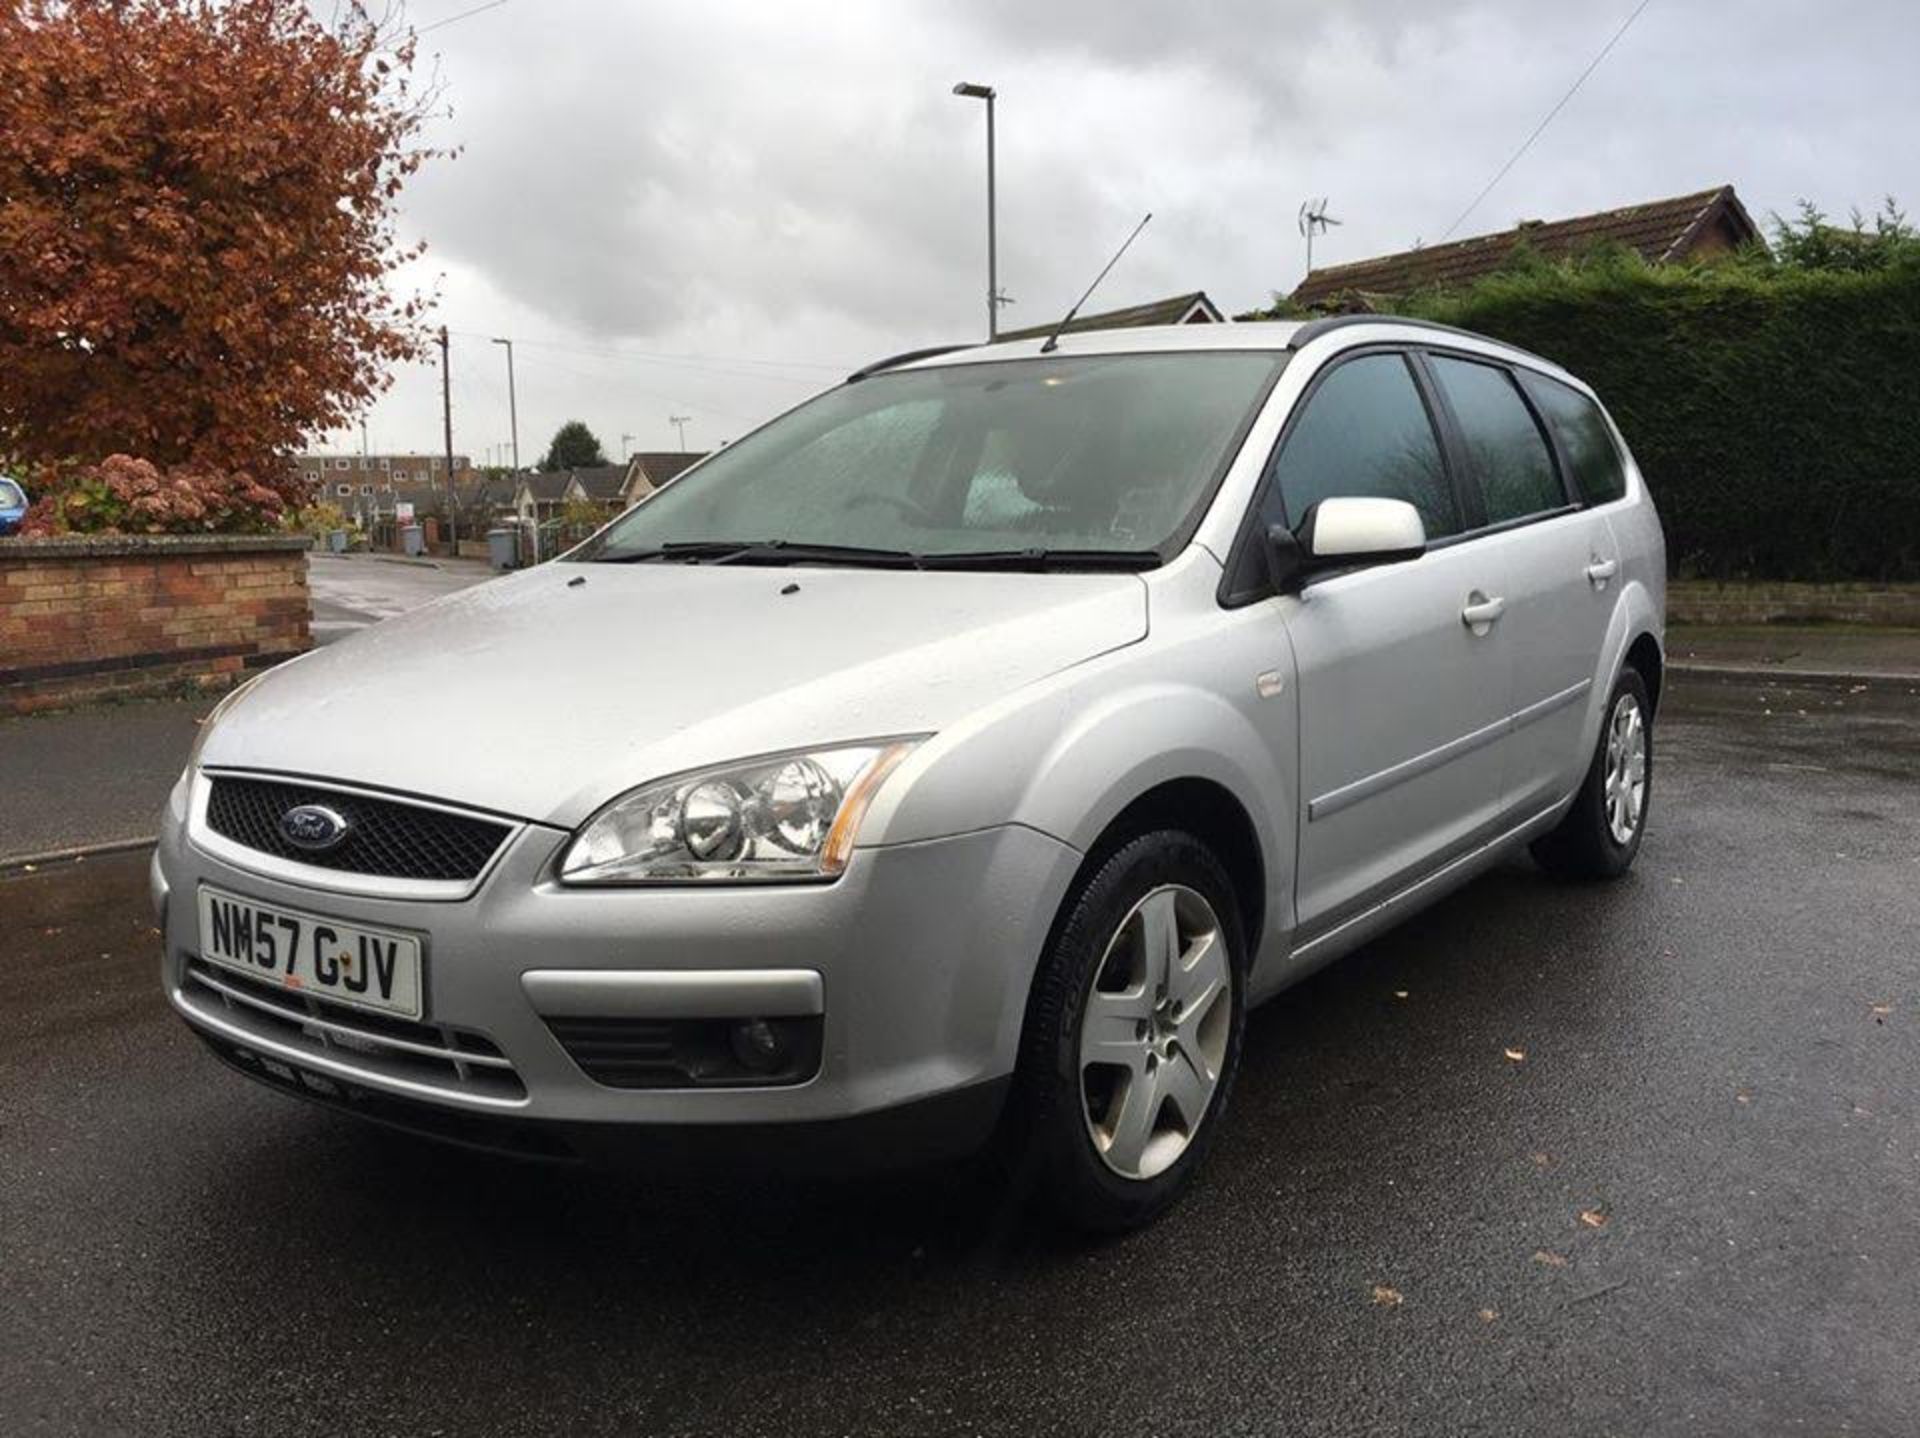 2008/57 PLATE FORD FOCUS 1.6 PETROL STYLE ESTATE, 91K MILES. MOT JULY 2017. - Image 4 of 12